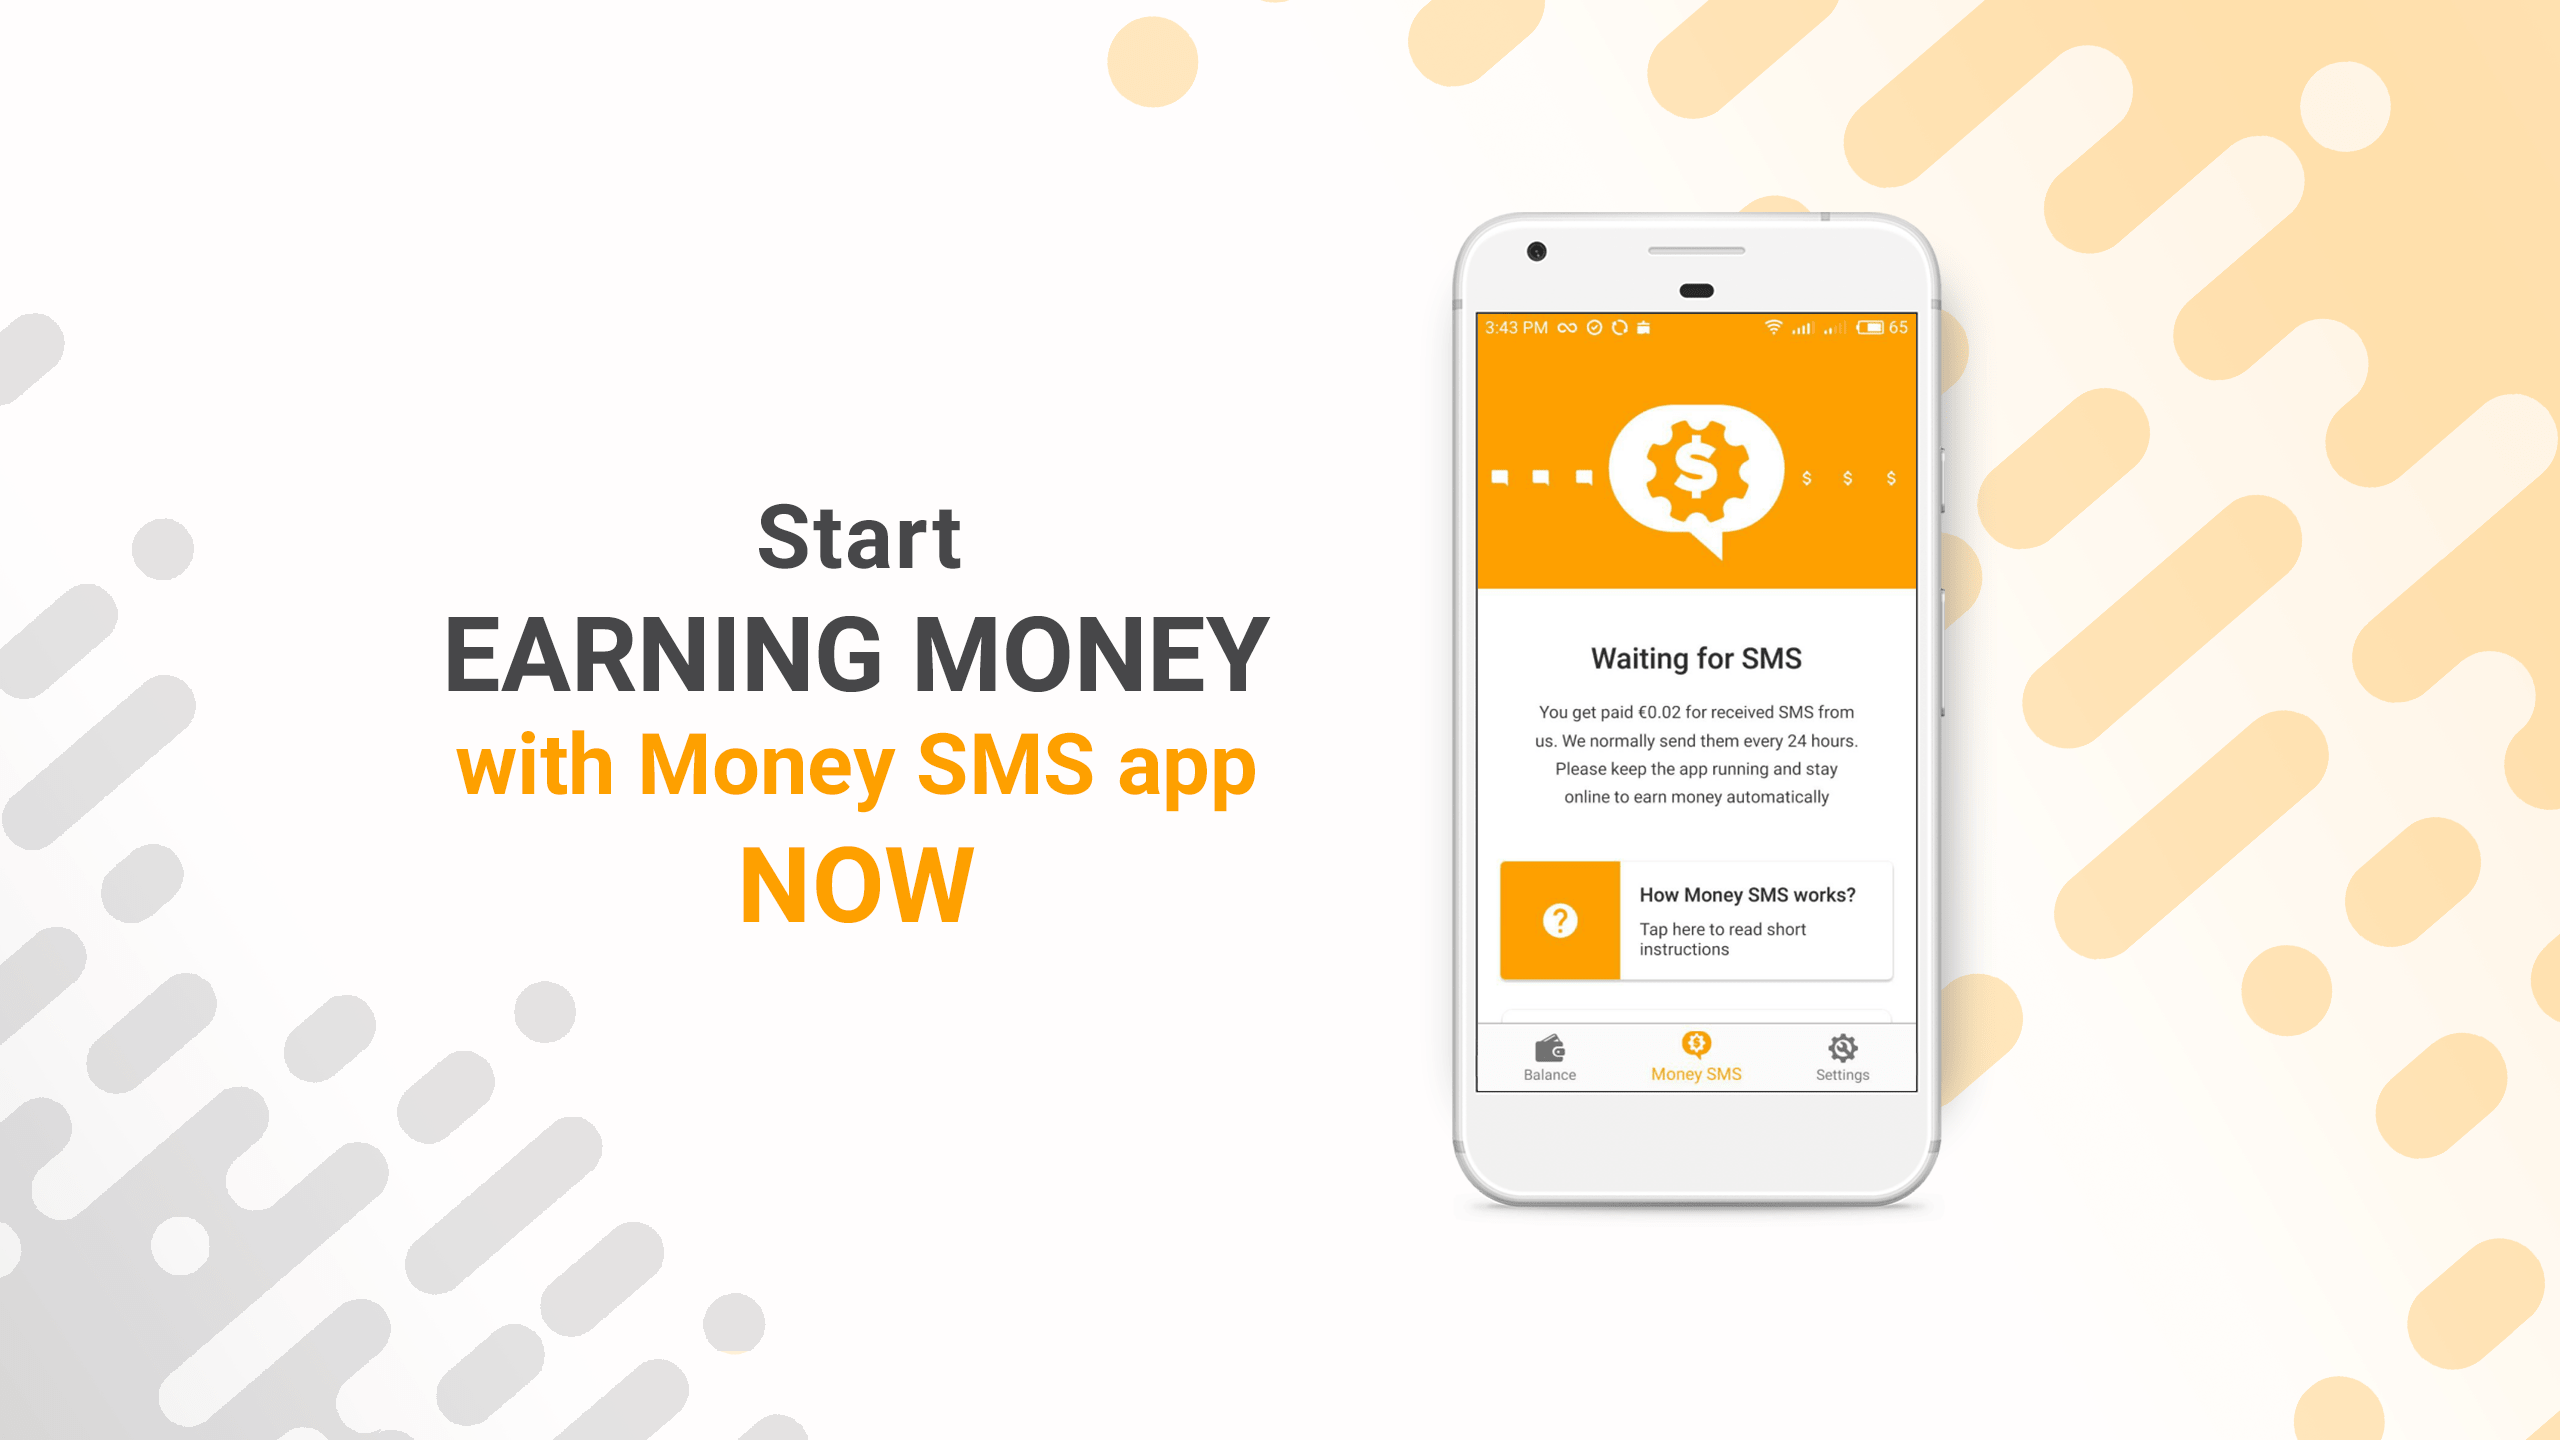 Make Money Online Money Sms App For Android - alternative text